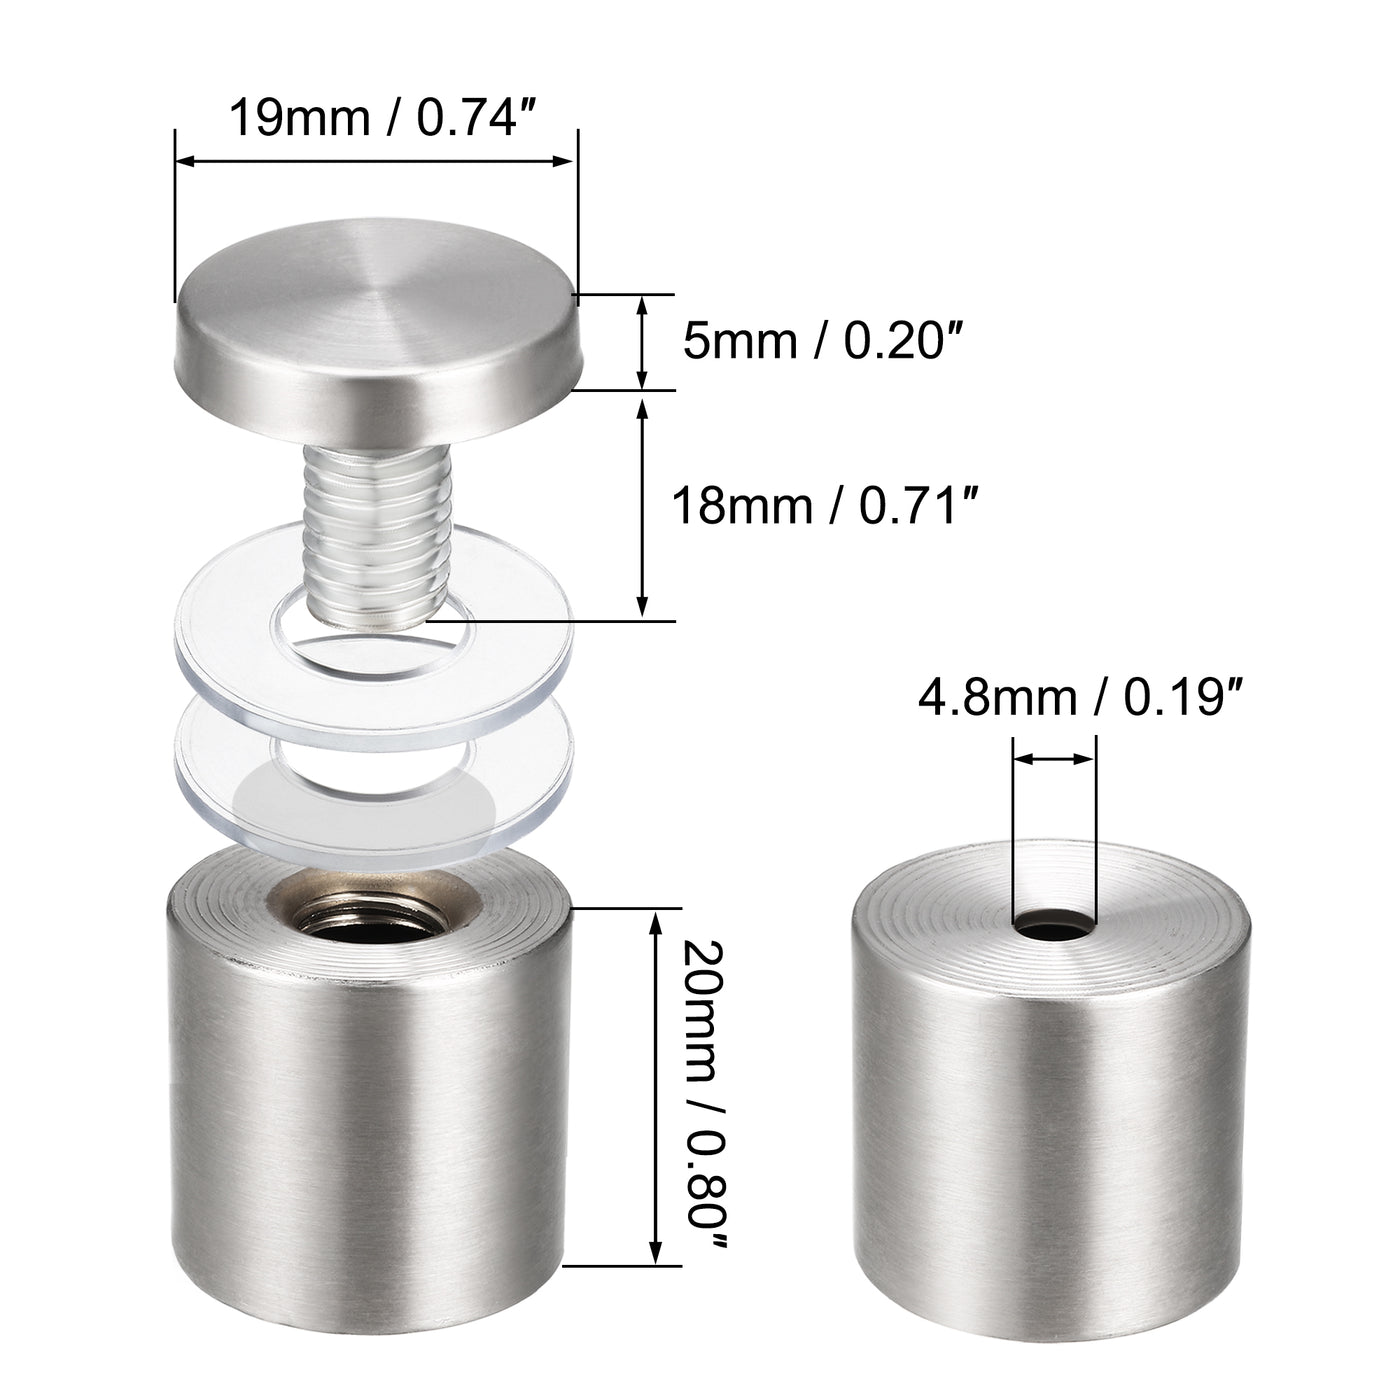 uxcell Uxcell Glass Standoff Mount Stainless Steel Wall Standoff Holder Advertising Nails 3/4" Dia 1" Length 4 Pcs